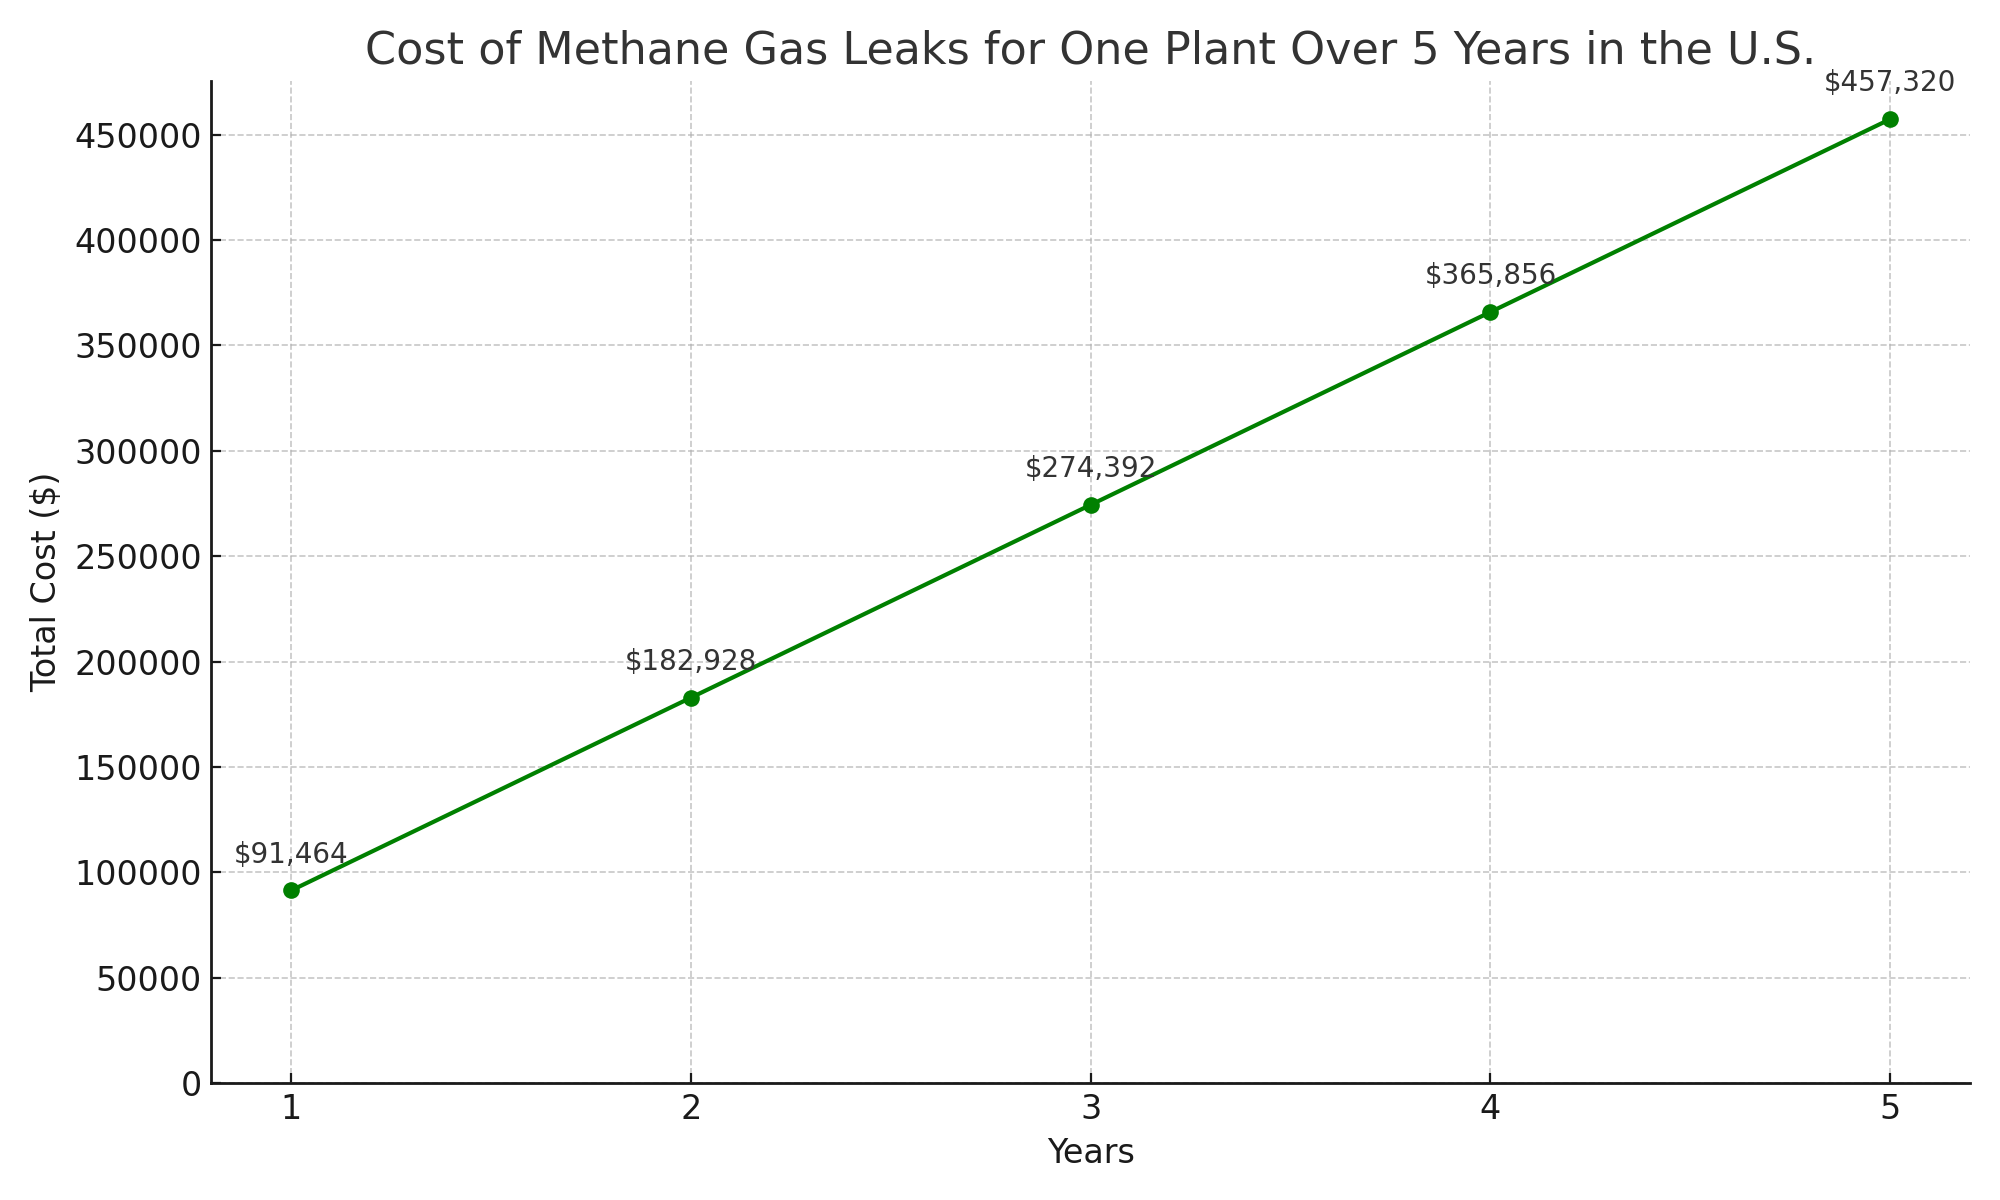 methane gas leaks per plant for five years